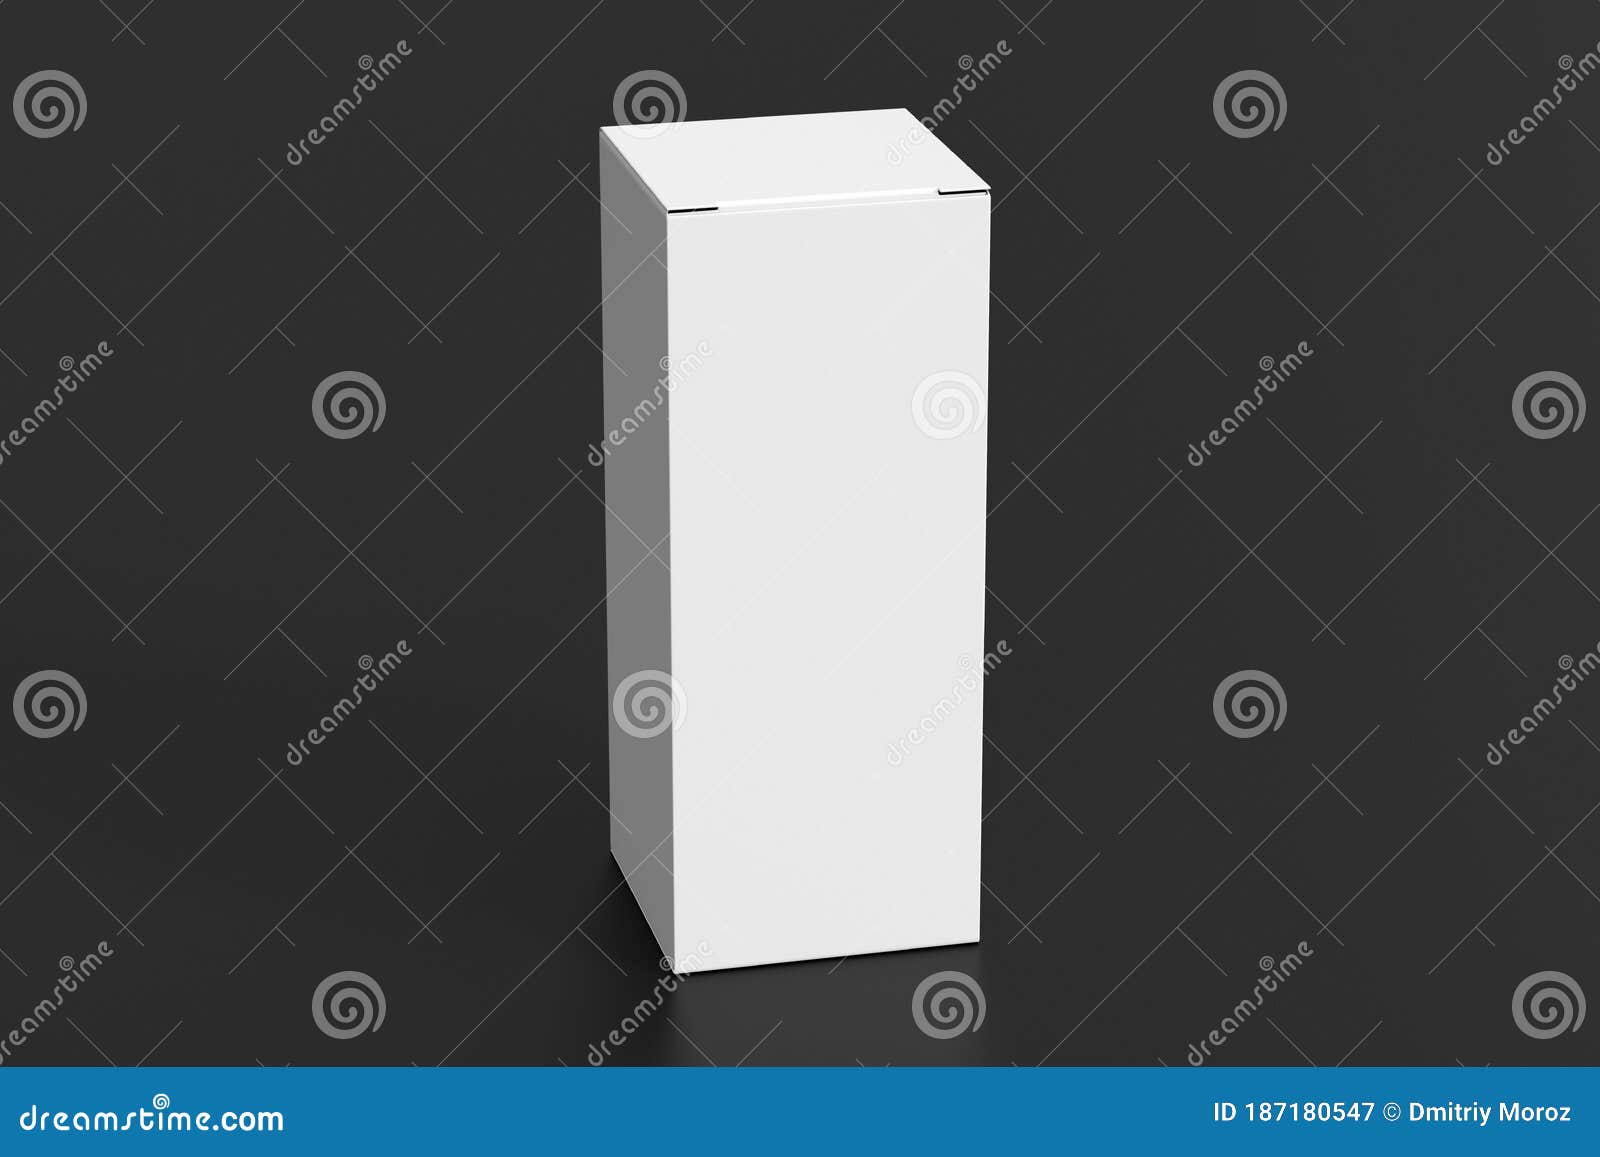 blank white tall and slim gift box with closed hinged flap lid on black background.